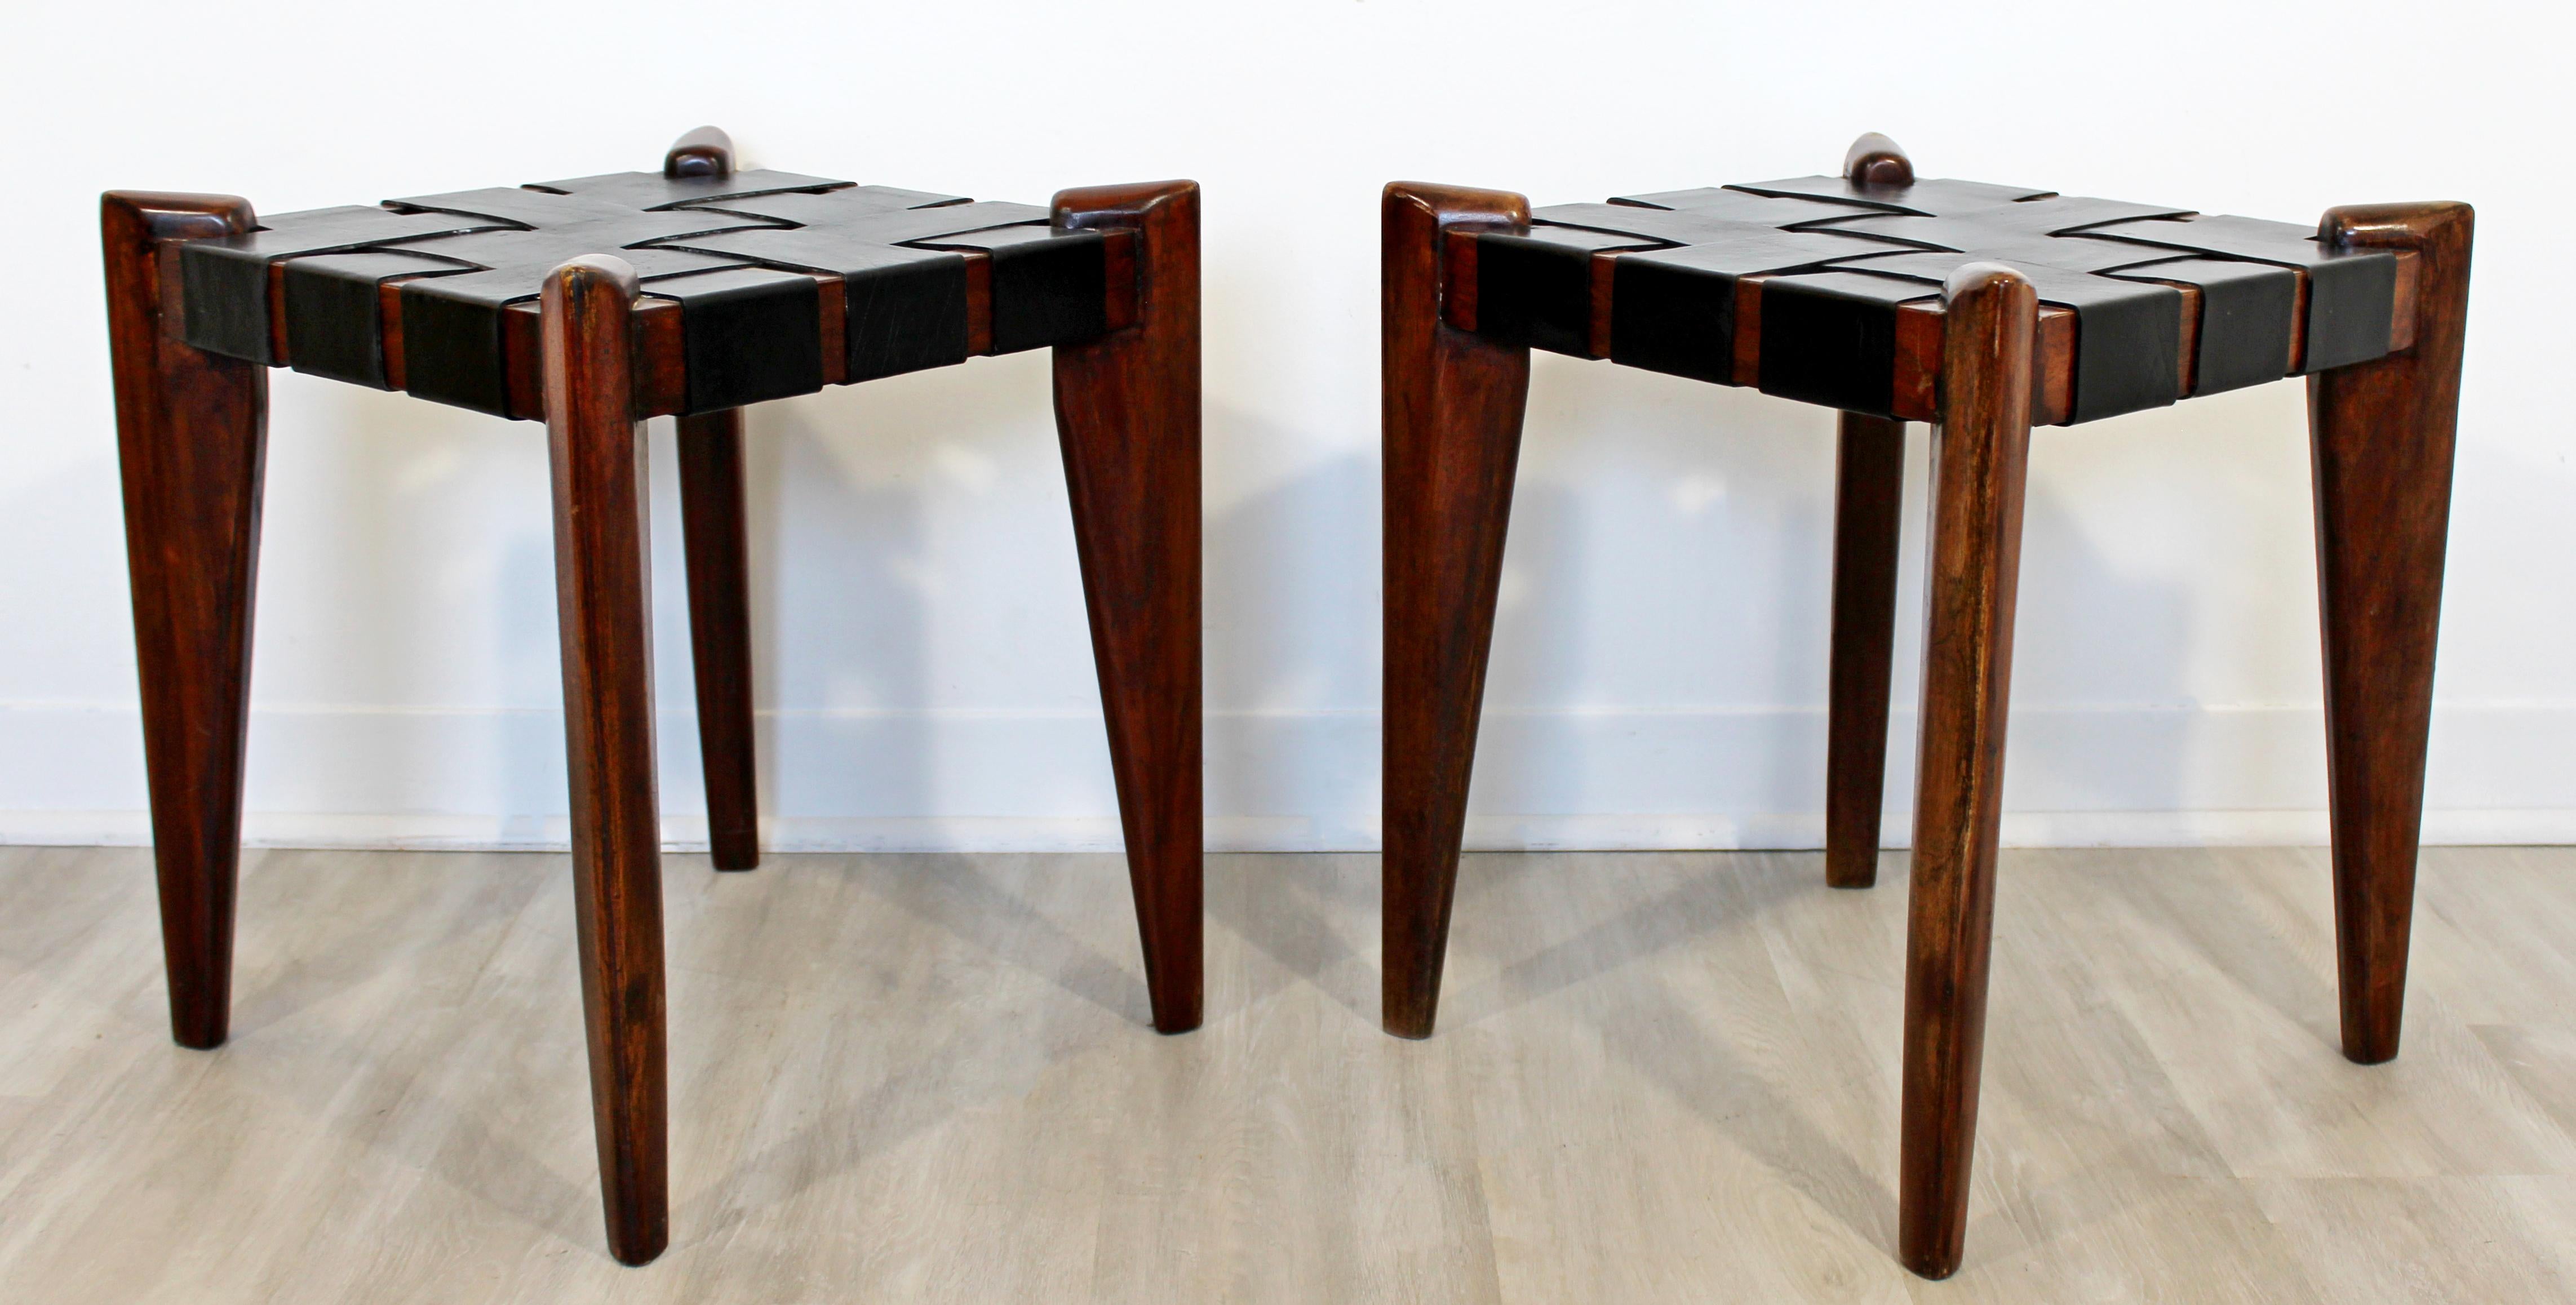 Mid-20th Century Mid-Century Modern Edmund Spence Woven Black Leather Benches Stools 1960s, Pair